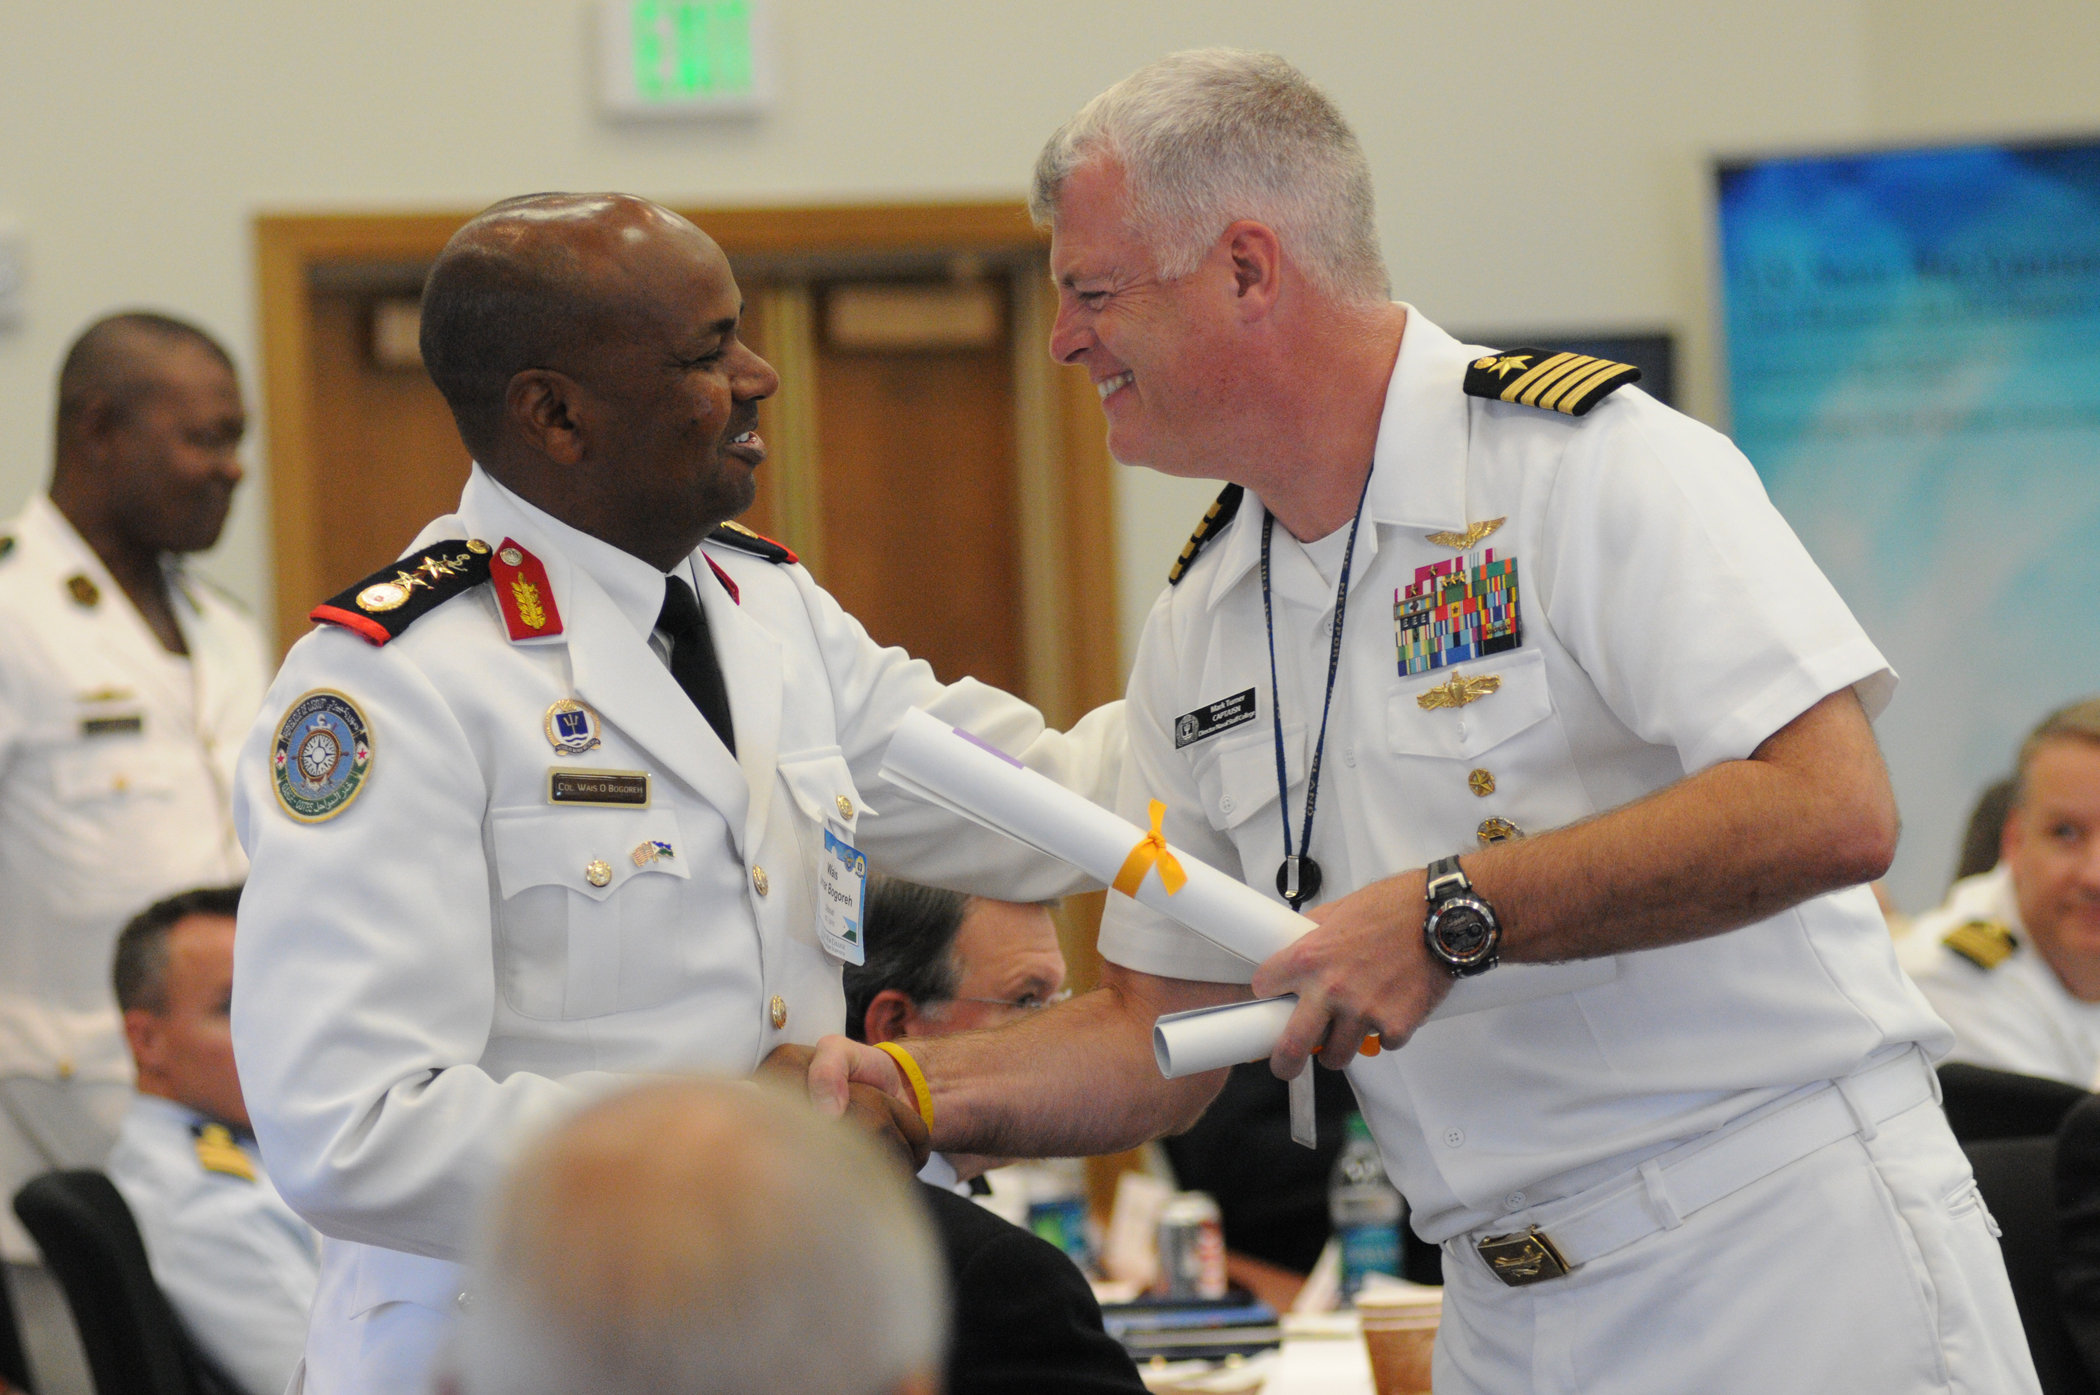 150827-N-XT779-035 NEWPORT, R.I. (Aug. 27, 2015) Capt. Mark Turner, director, Naval Staff College, U.S Naval War College (NWC), presents Djibouti coast guard Col. Wais O. Bogoreh, a NWC alumnus, with a commemorative gift during NWC's 12th Regional Alumni Symposium-Africa, held at NWC in Newport, Rhode Island. The event, co-hosted by U.S. Naval Forces Europe-Africa and U.S. 6th Fleet and sponsored by U.S. Africa Command, served as an opportunity to strengthen global maritime partnerships and address strategic, operational and technical issues of relevance to the Africa region. Thirty-eight international NWC alumni from 22 countries in Africa, Europe and South America were in attendance. (U.S. Navy photo by Ezra Bolender/Released)